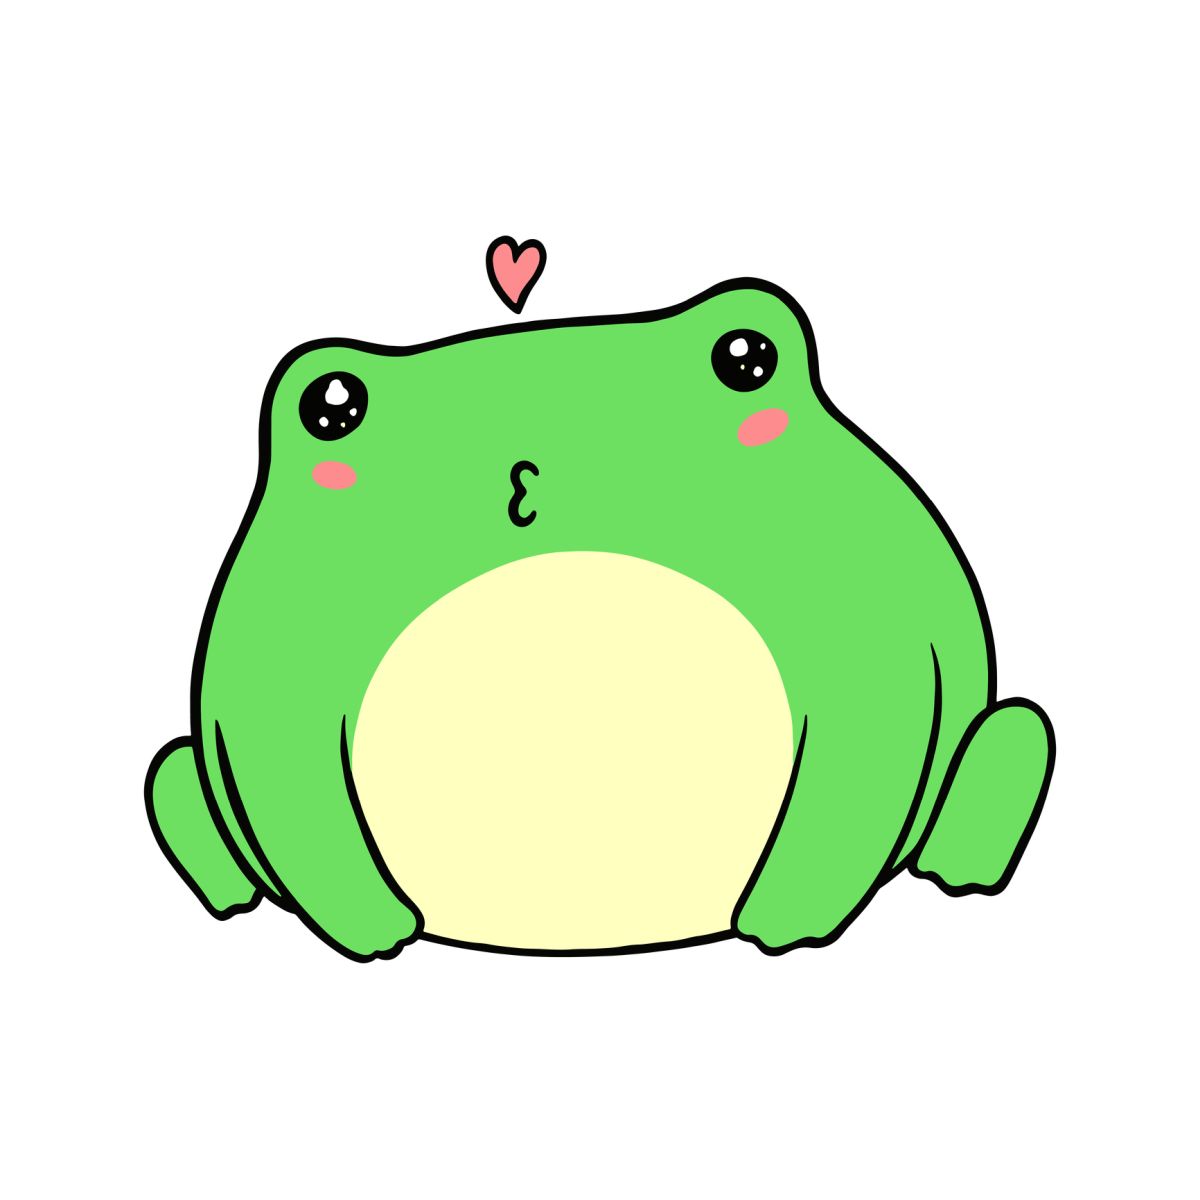 How To Draw a Frog